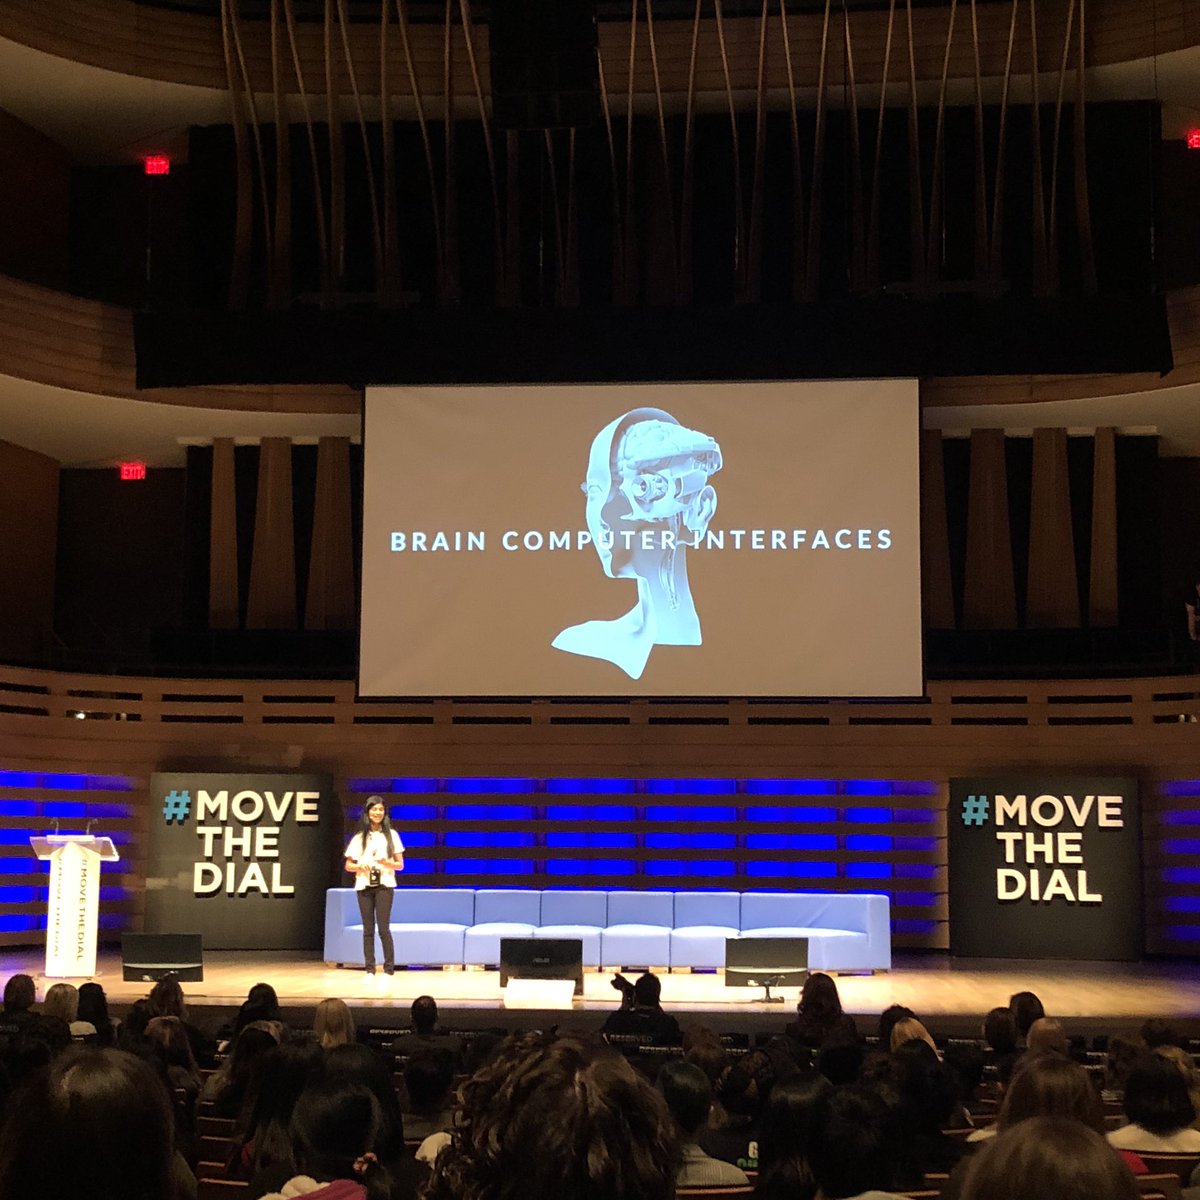 At 15 my Mom was still packing my lunch - @riyakarumanchi is the CEO & Founder of @smartcane and is working on Brain Computer Interfaces. 👏👏👏 #artificialIntelligence #advancedtechnologies #movethedialsummit